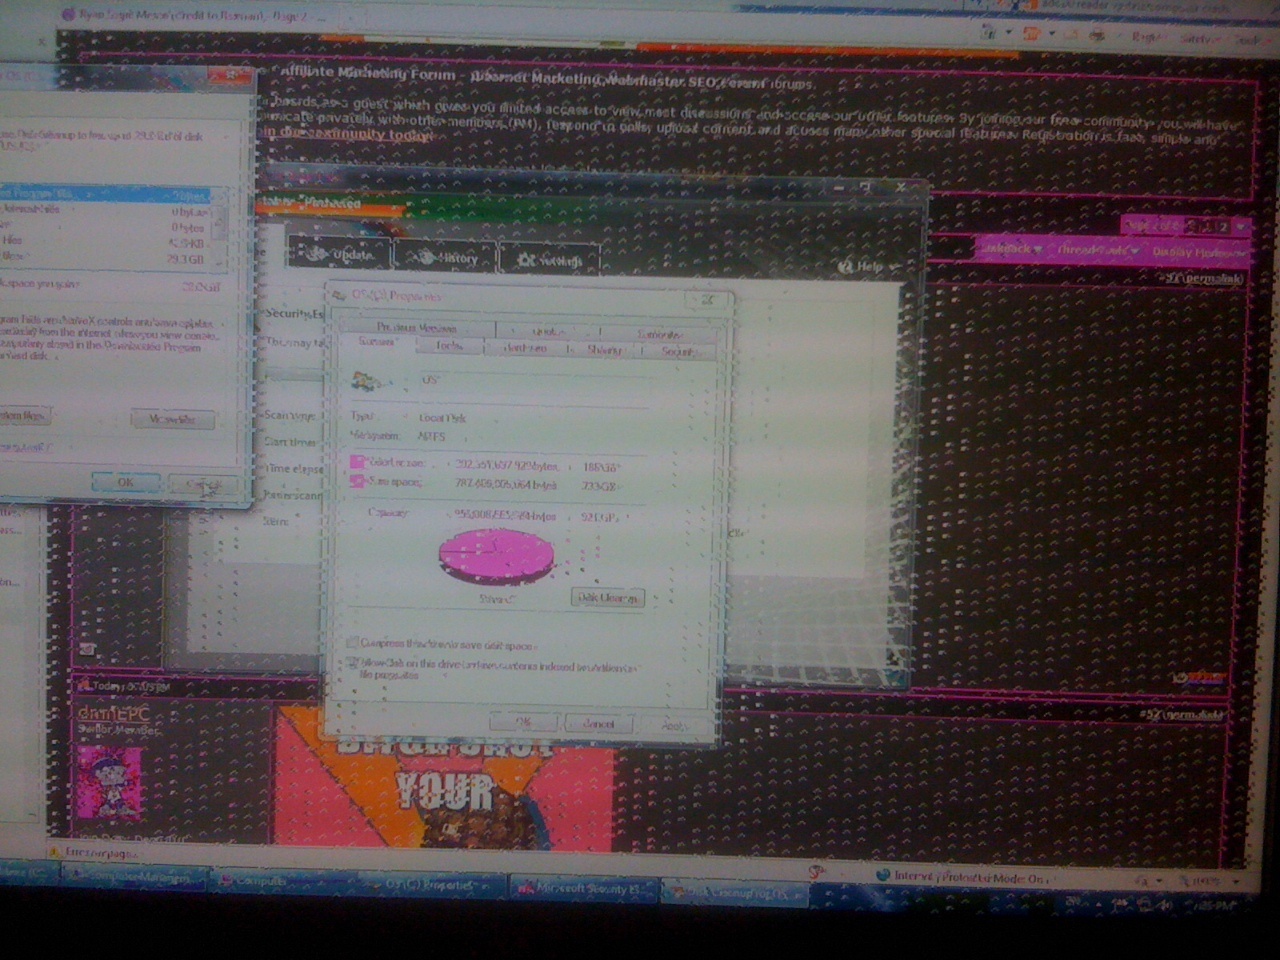 Pixelated Screen and Unexpected Crash - Windows 7 - Picture - Image - Photo